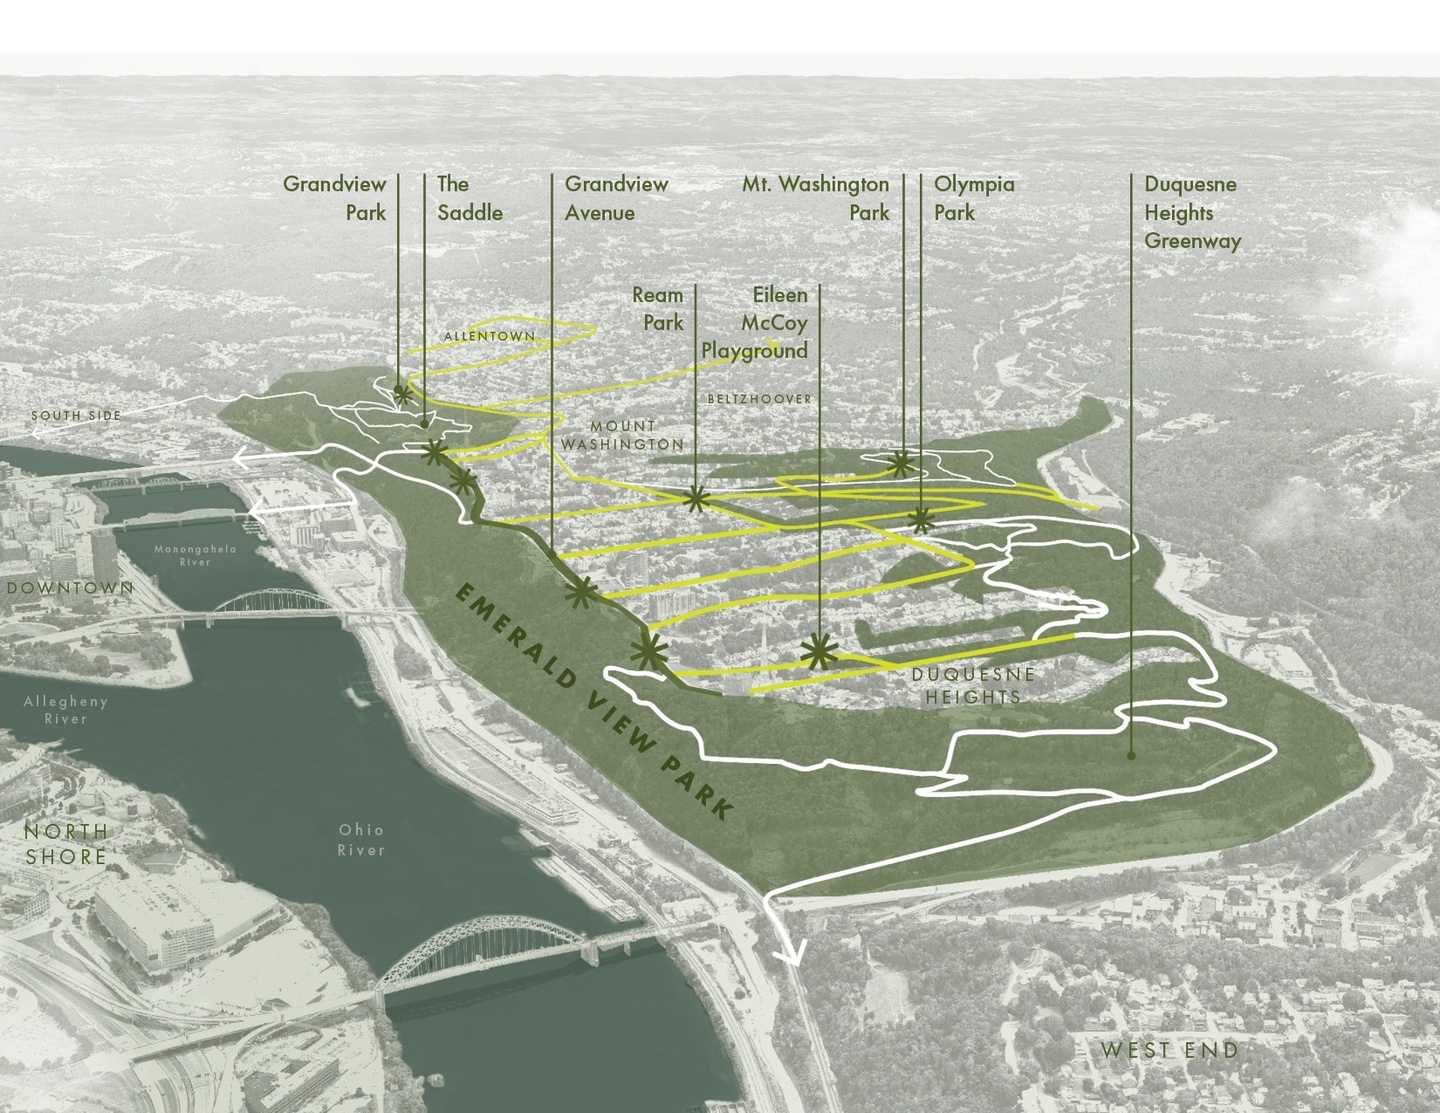 Plan view of proposed areas for a large park with labels highlighting different areas